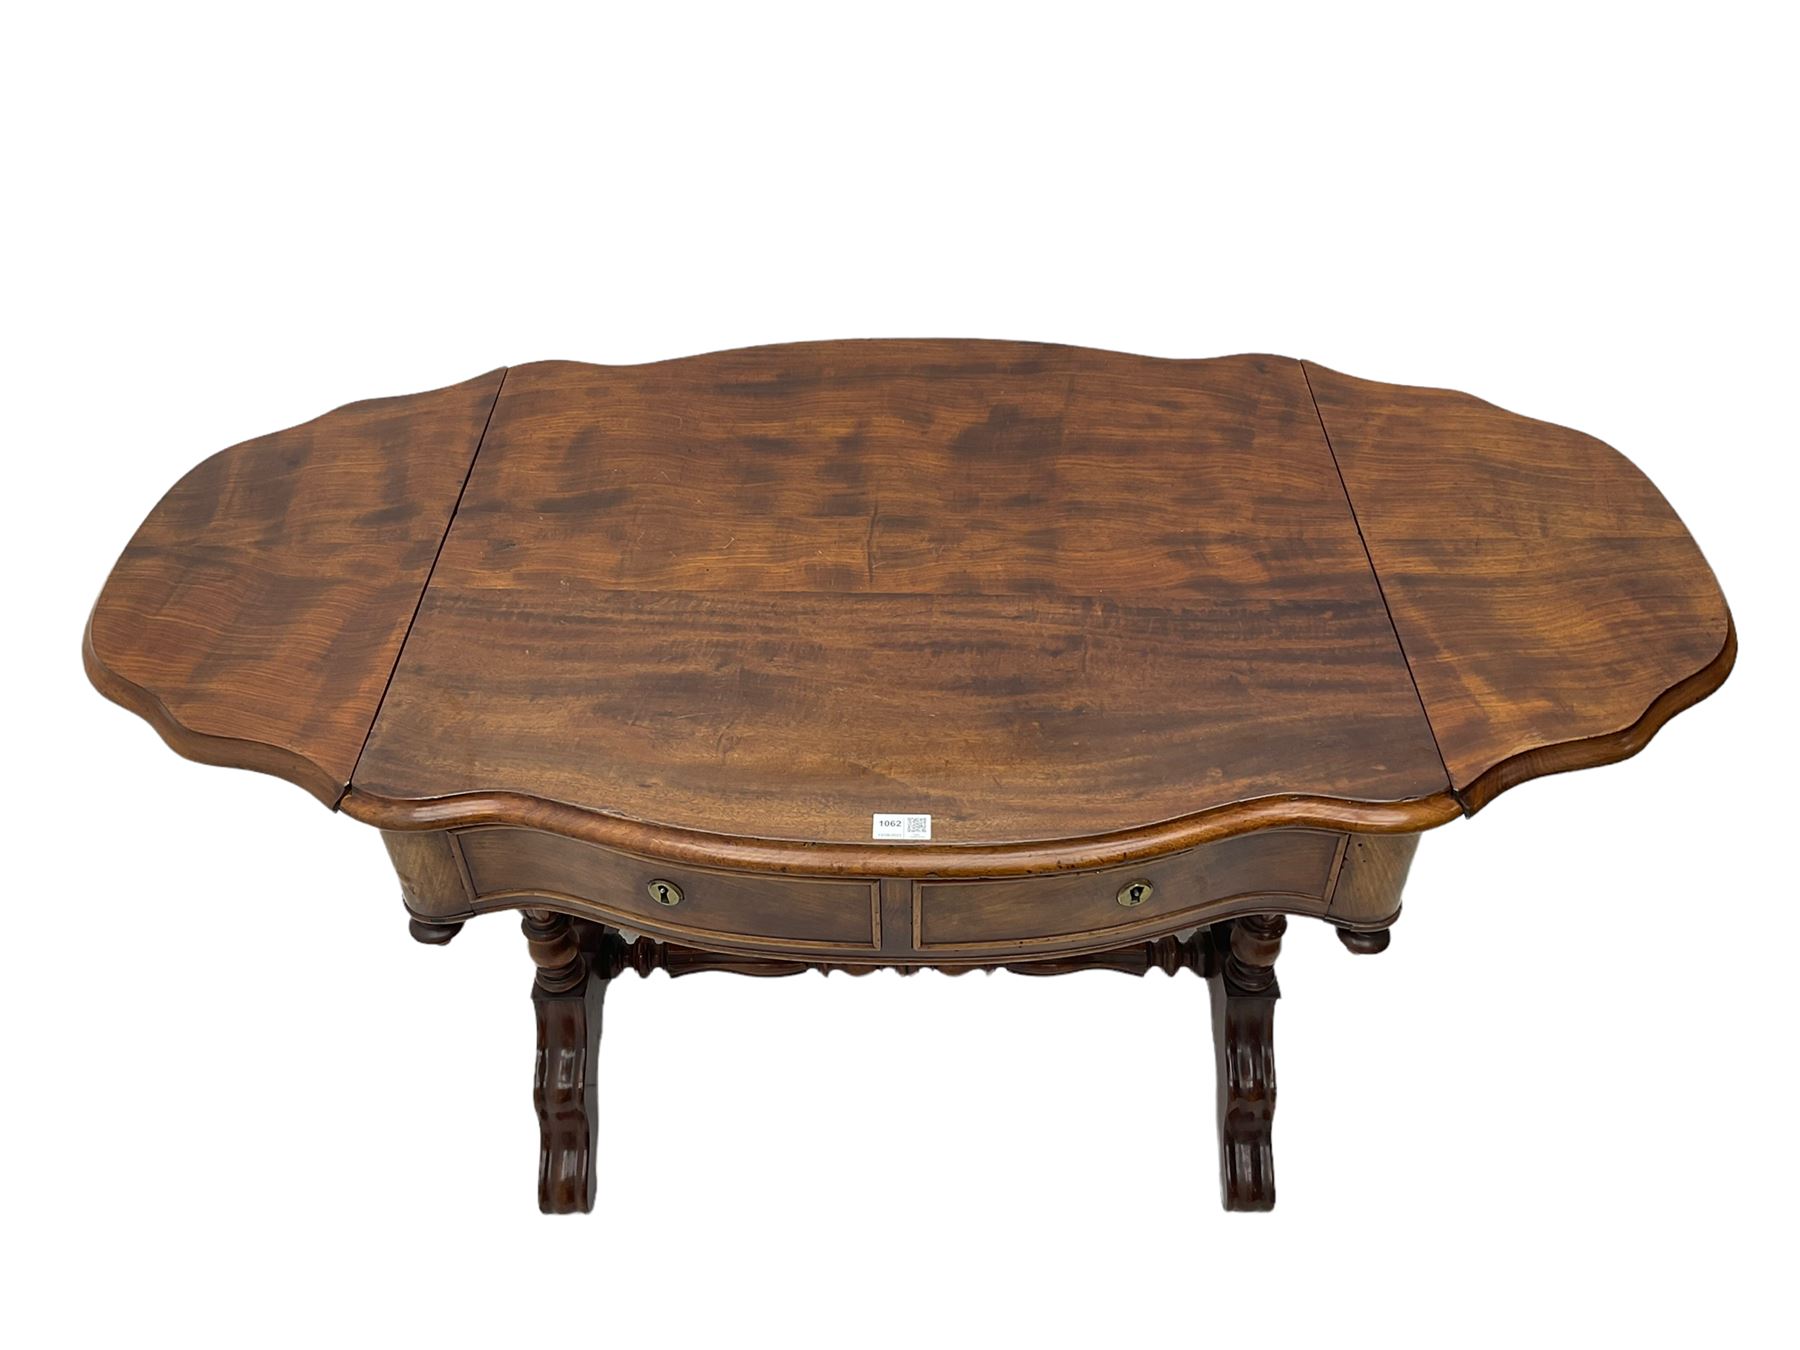 Victorian figured mahogany stretcher table - Image 4 of 7